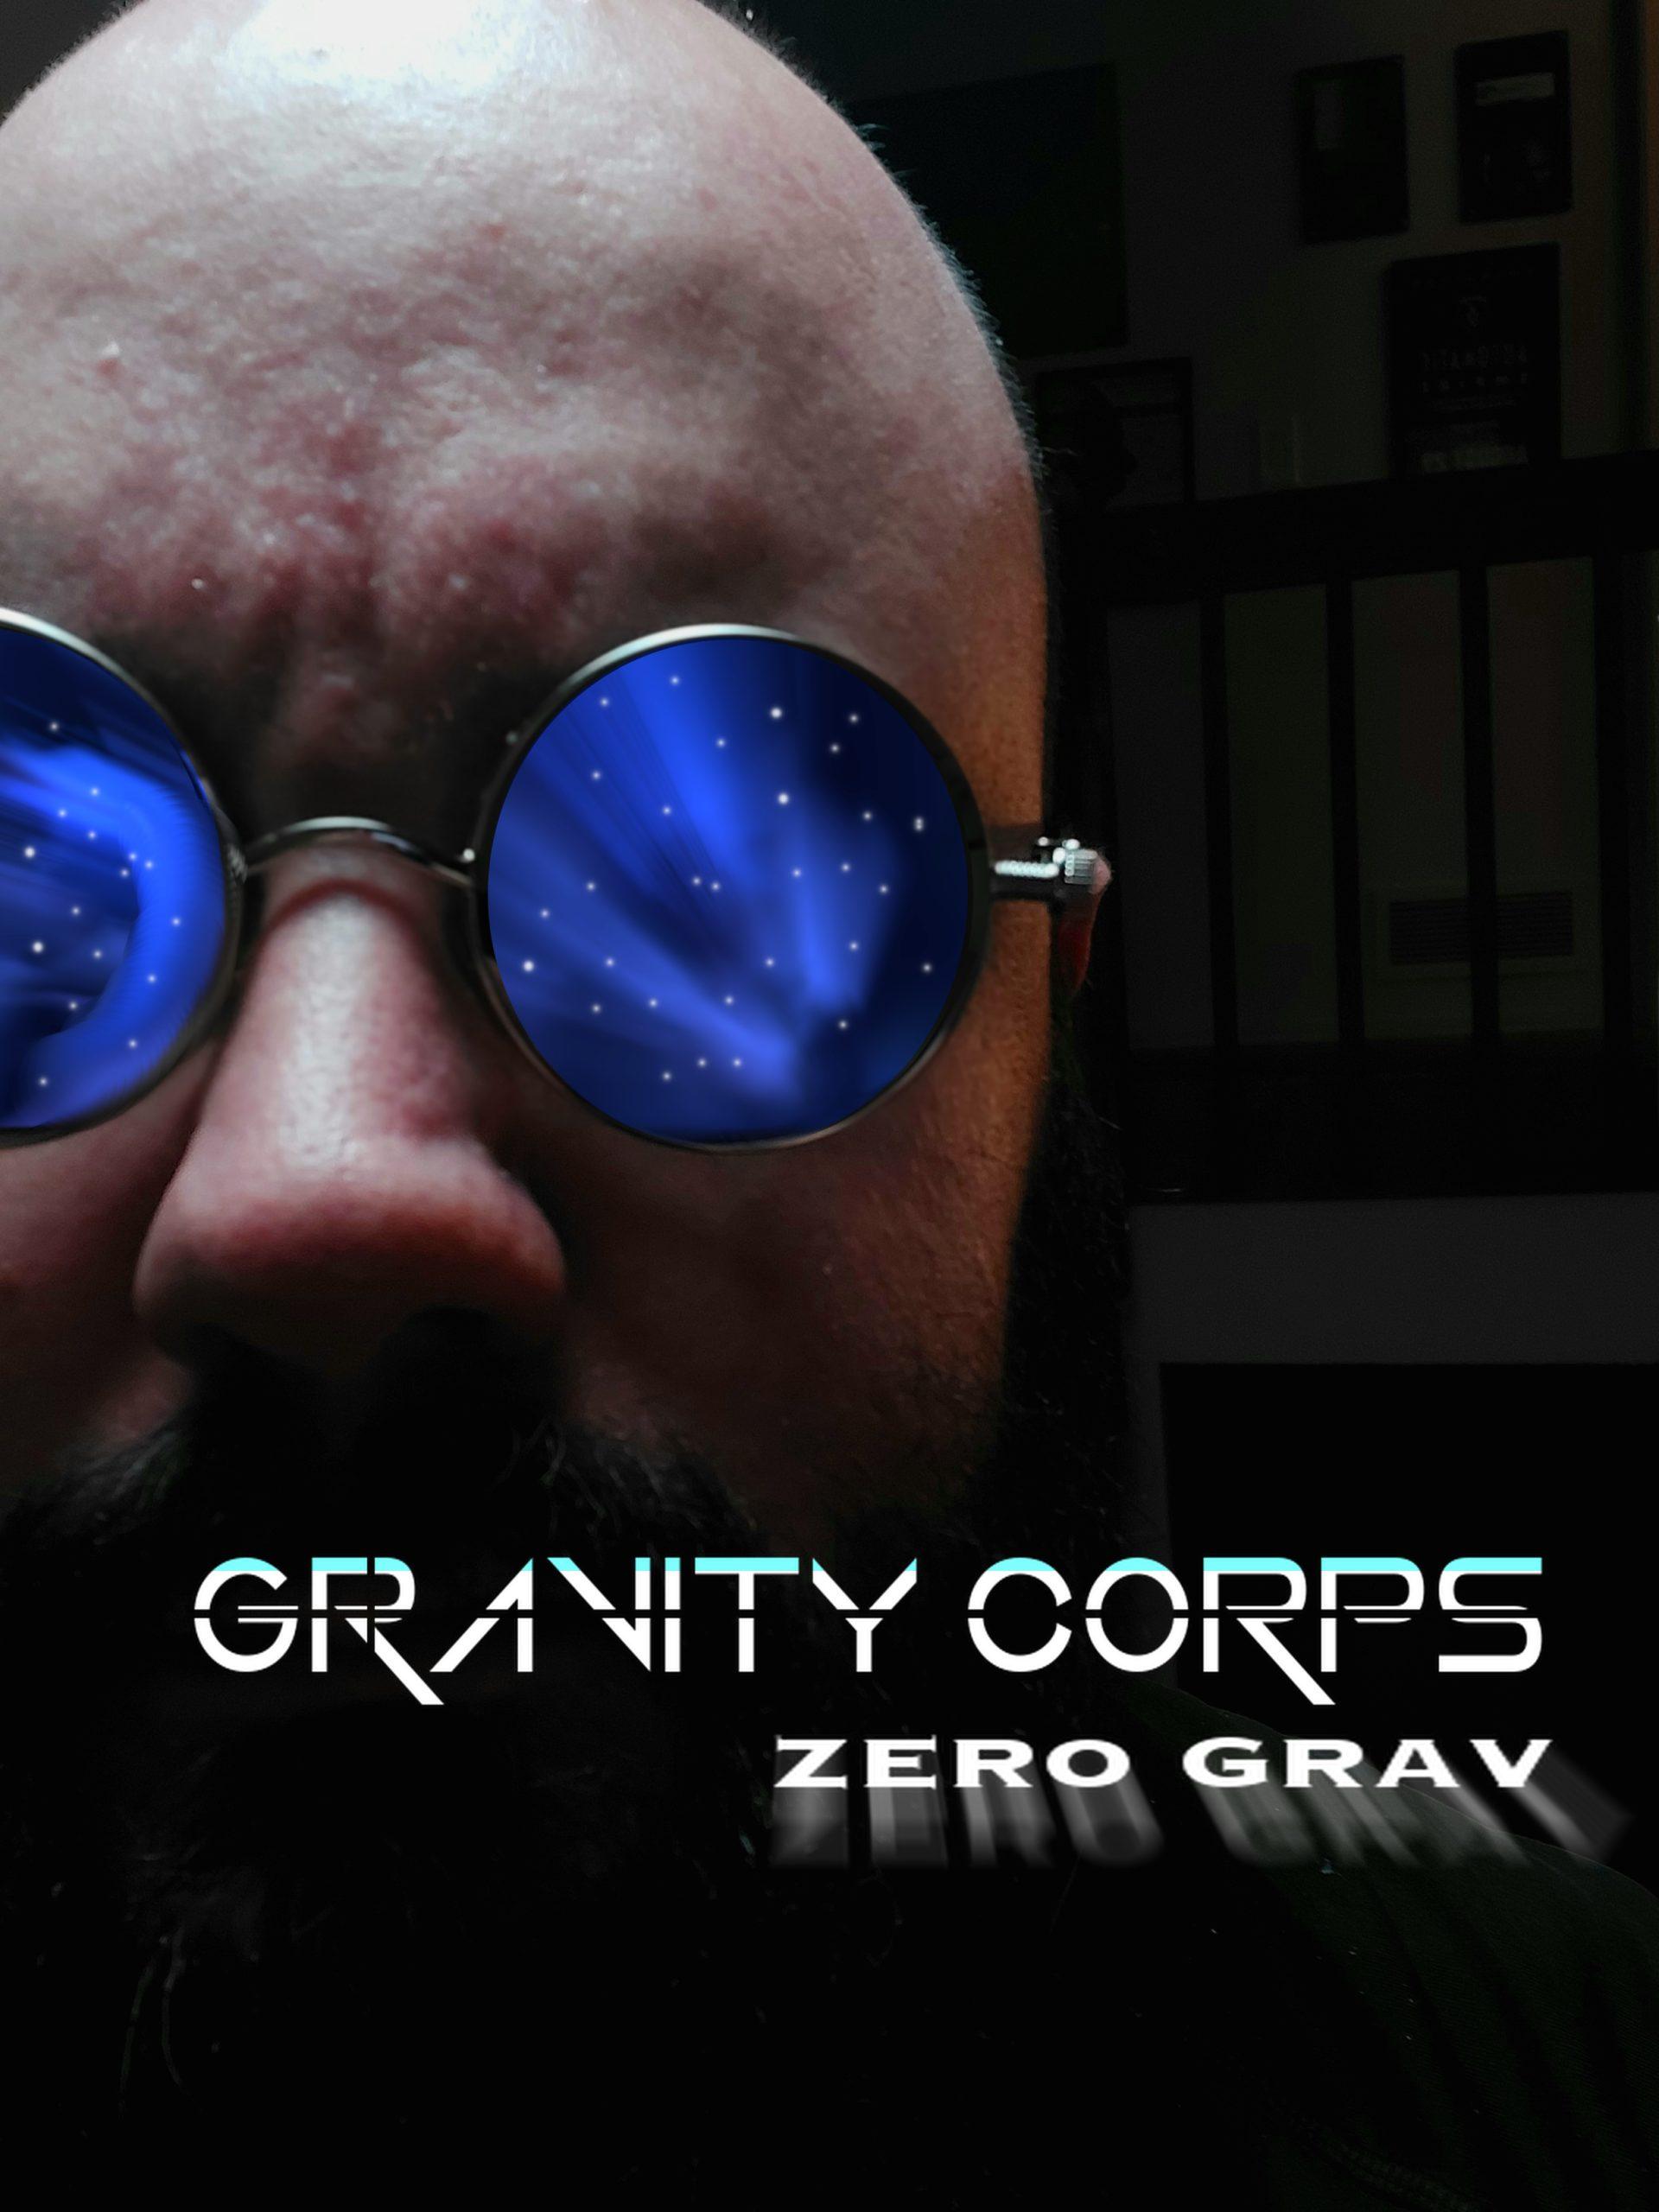 The debut EP from VOICECOIL’s side-project GRAVITY CORPS is out